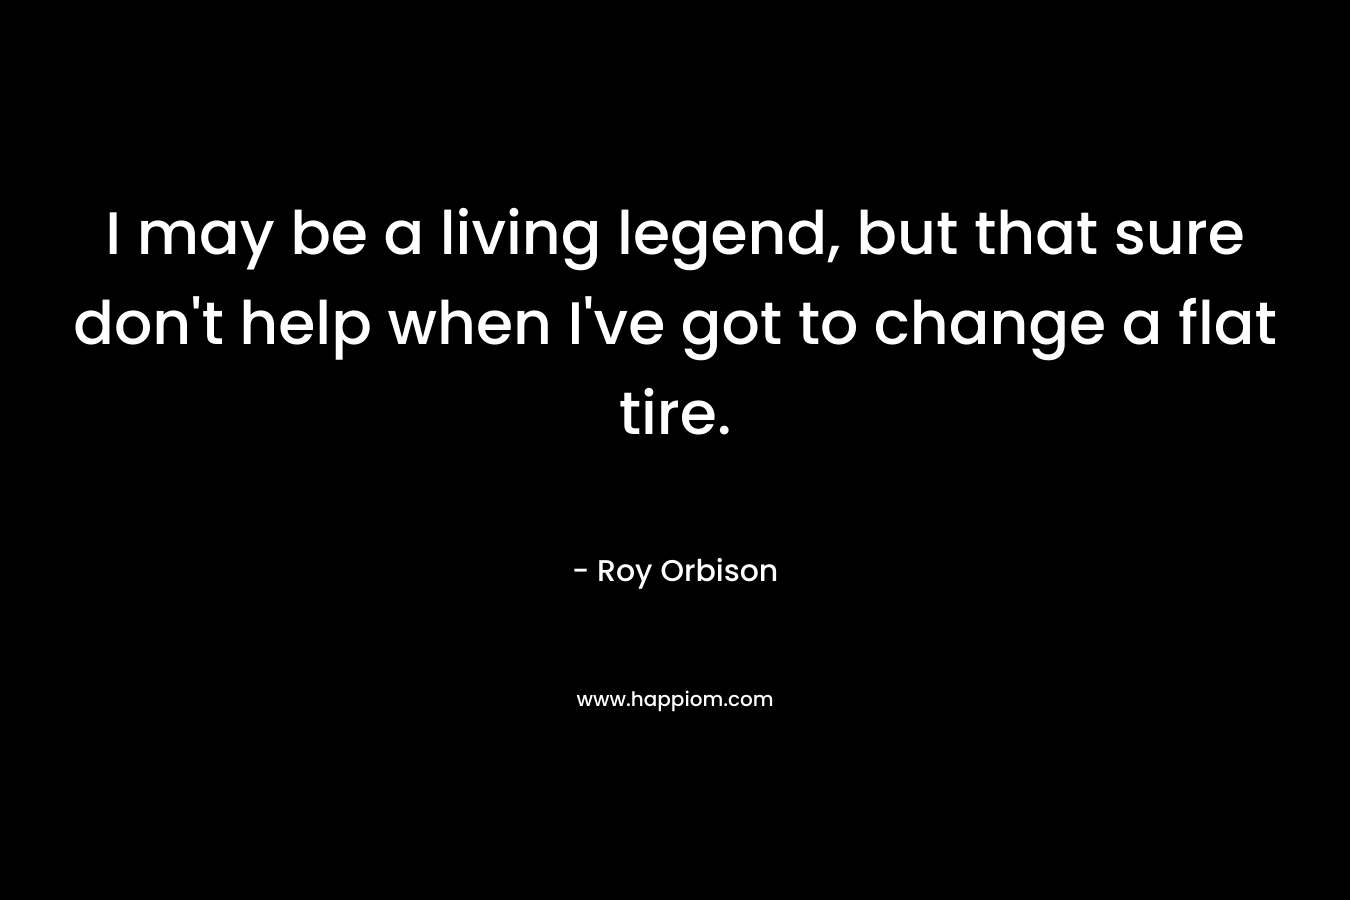 I may be a living legend, but that sure don’t help when I’ve got to change a flat tire. – Roy Orbison